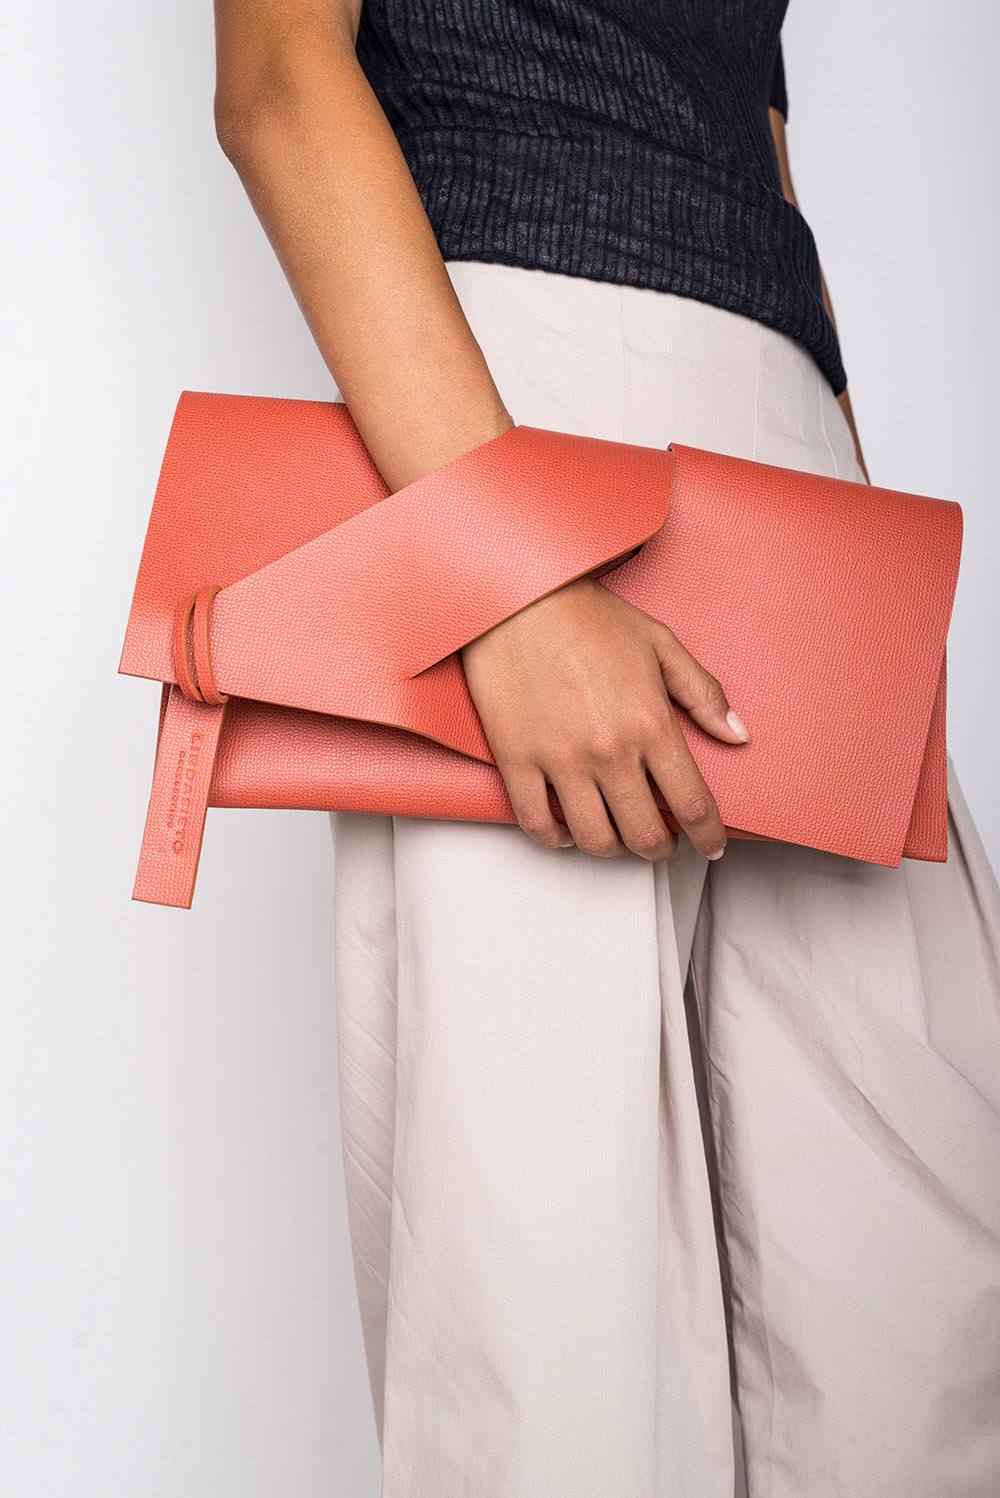 The Isabelle Orange Leather Cross Body Bag